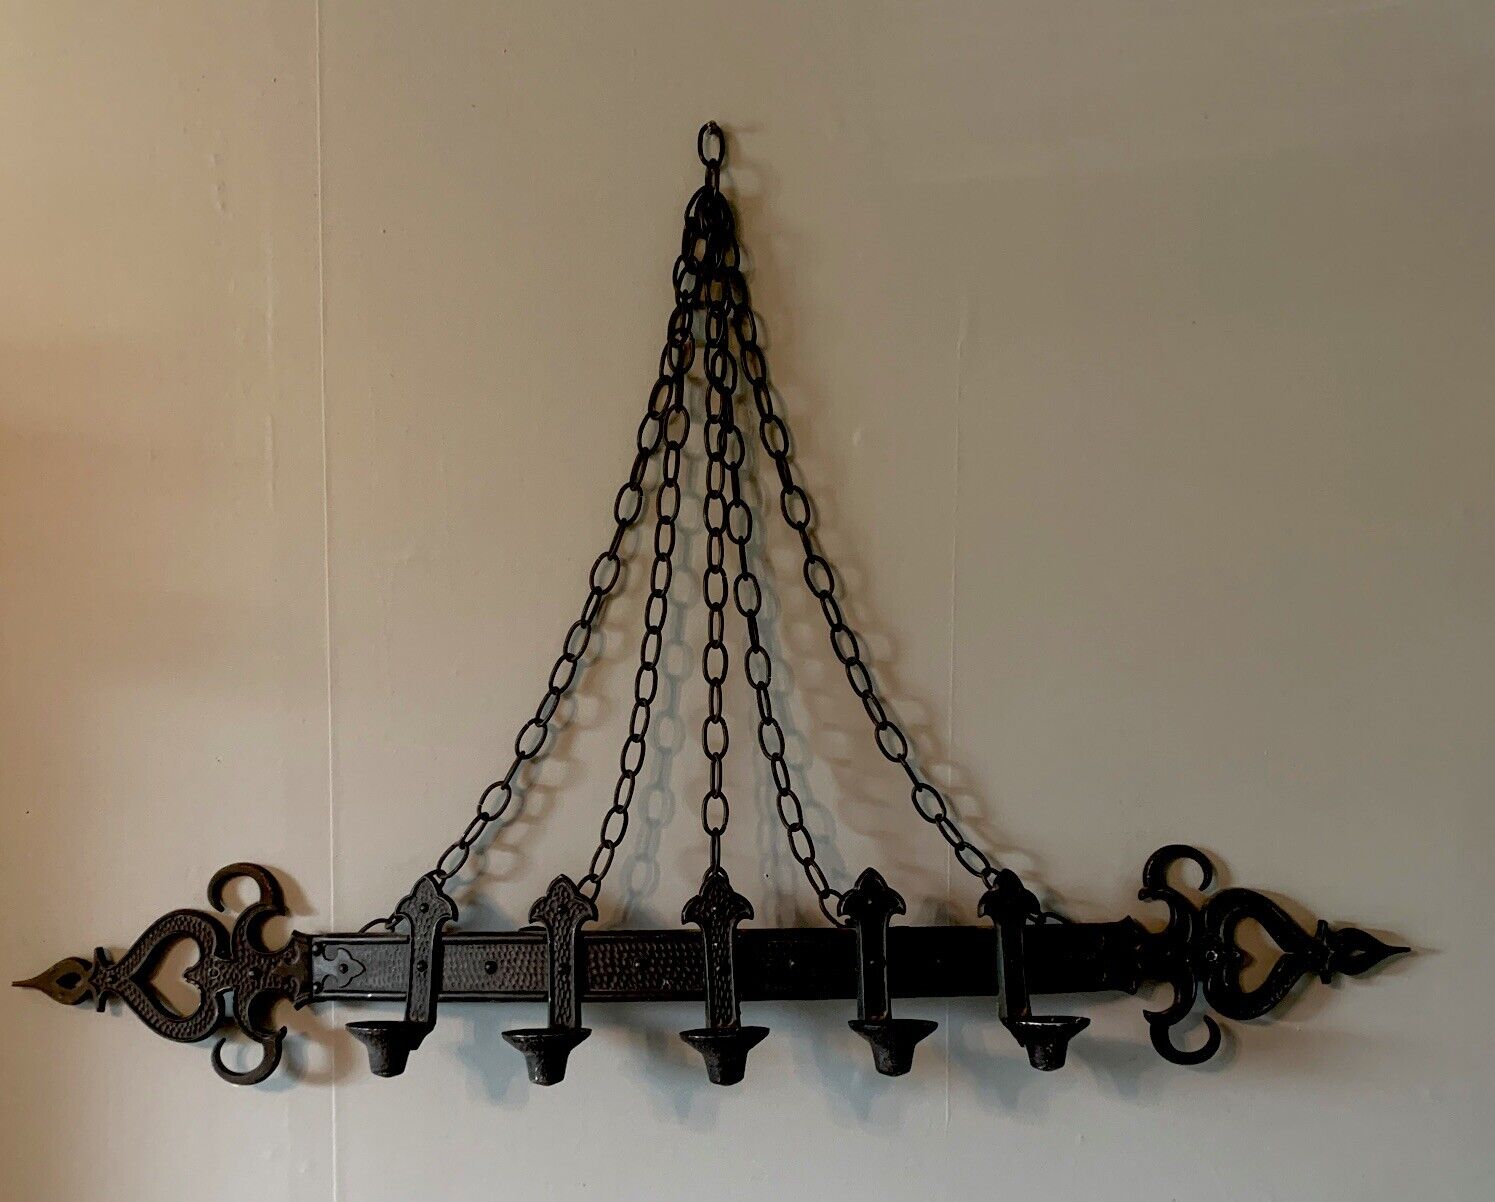 Vtg SPANISH Revival Mission Sexton wrought iron Gothic candle holder sconce 47”